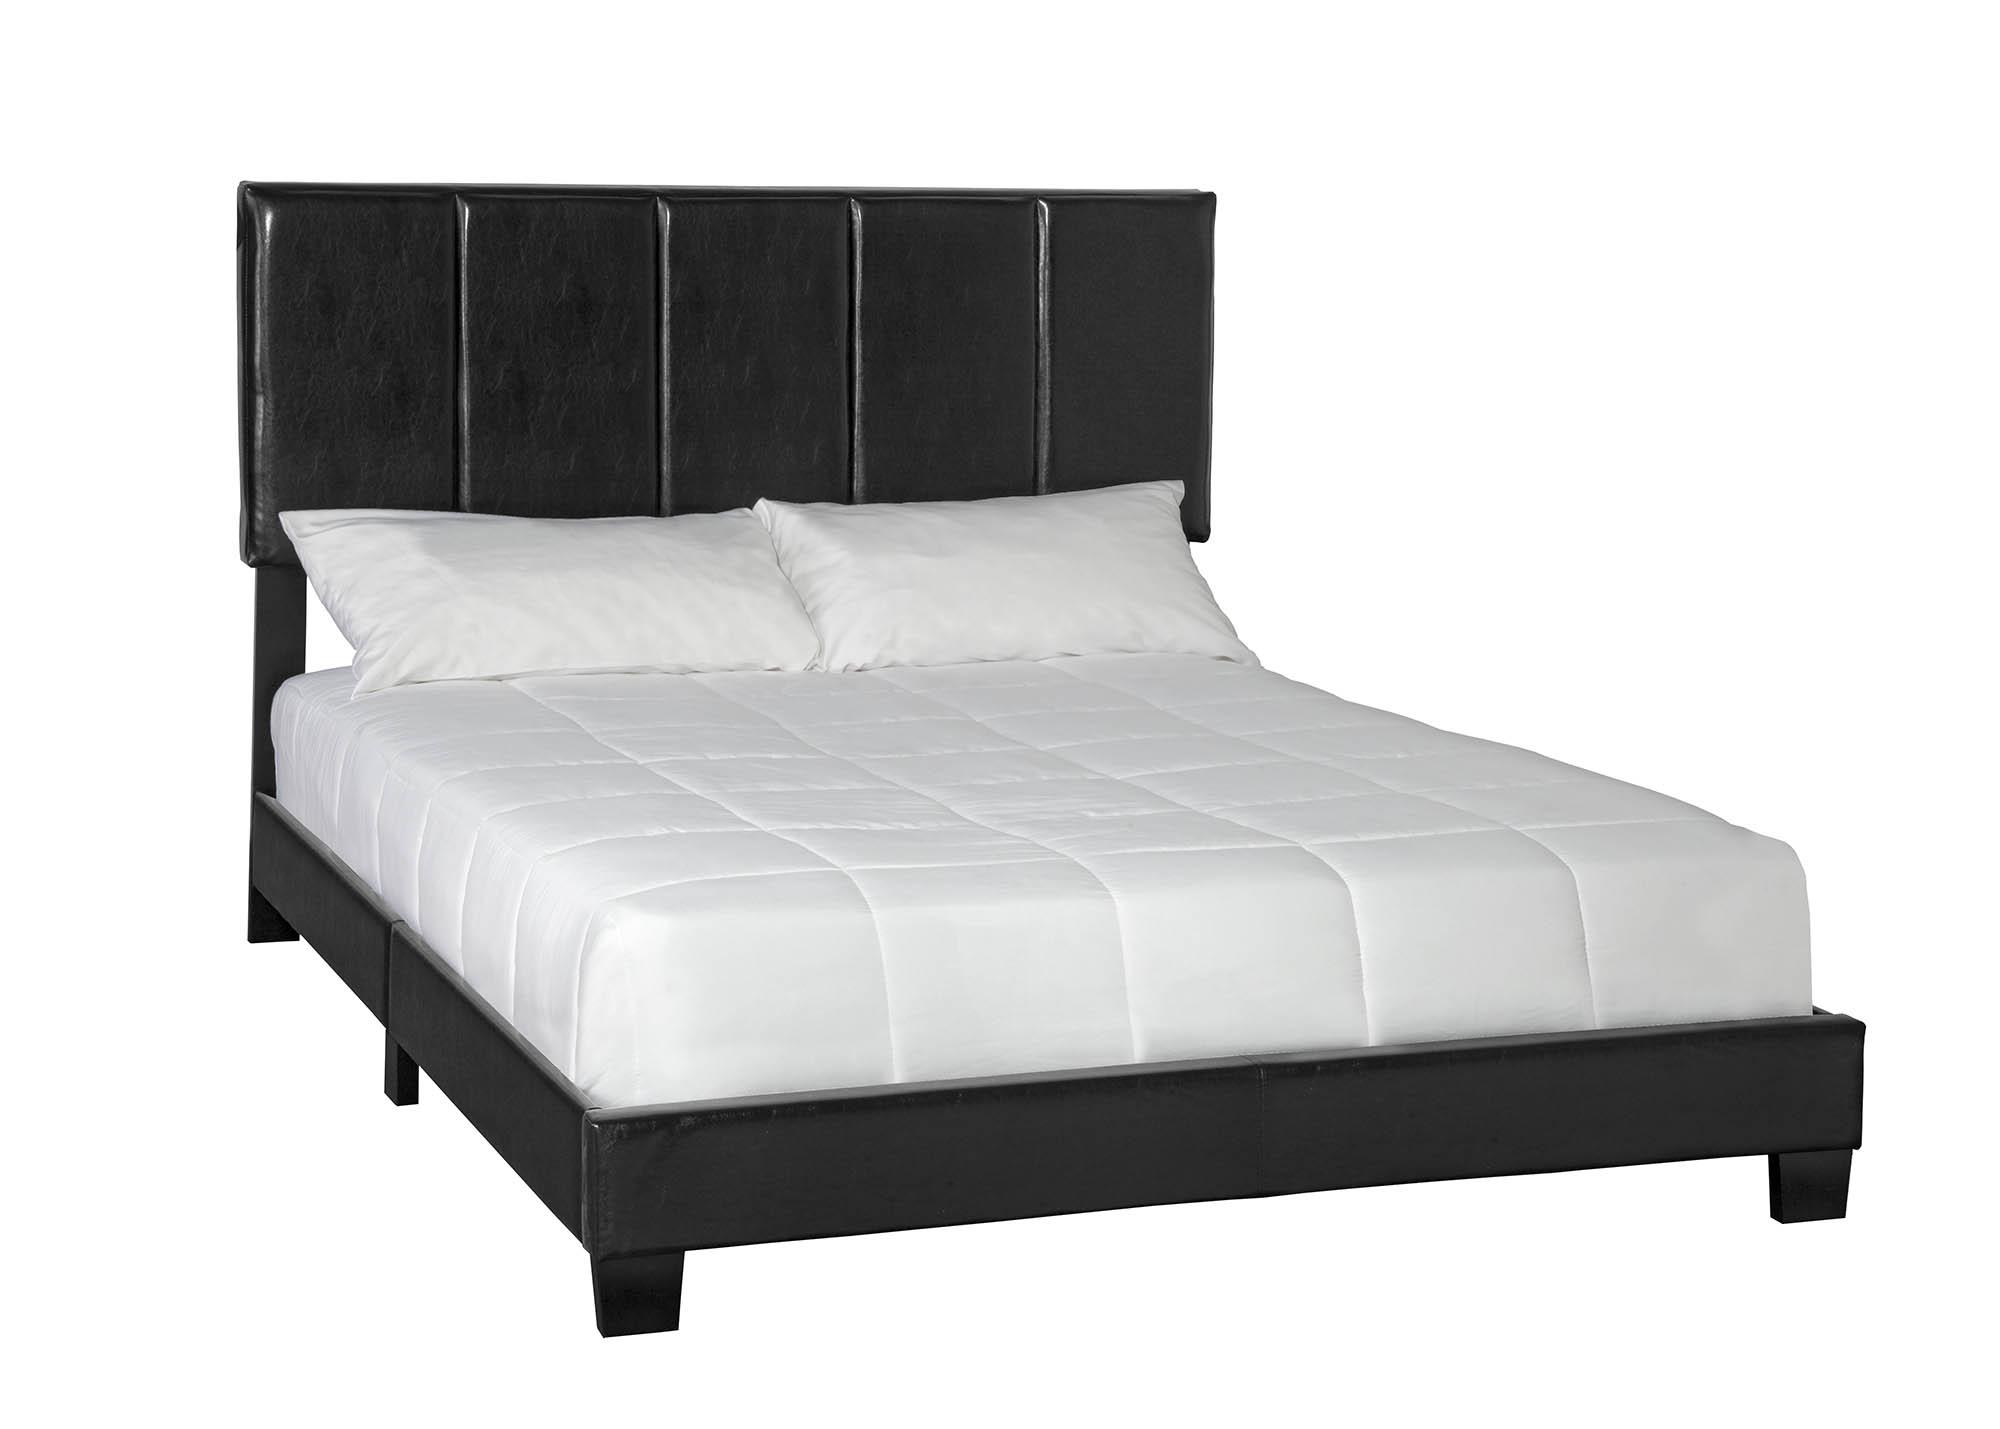 Modern, Transitional Panel Bed HARPER 1601DS-110 1601DS-110 in Black Eco Leather